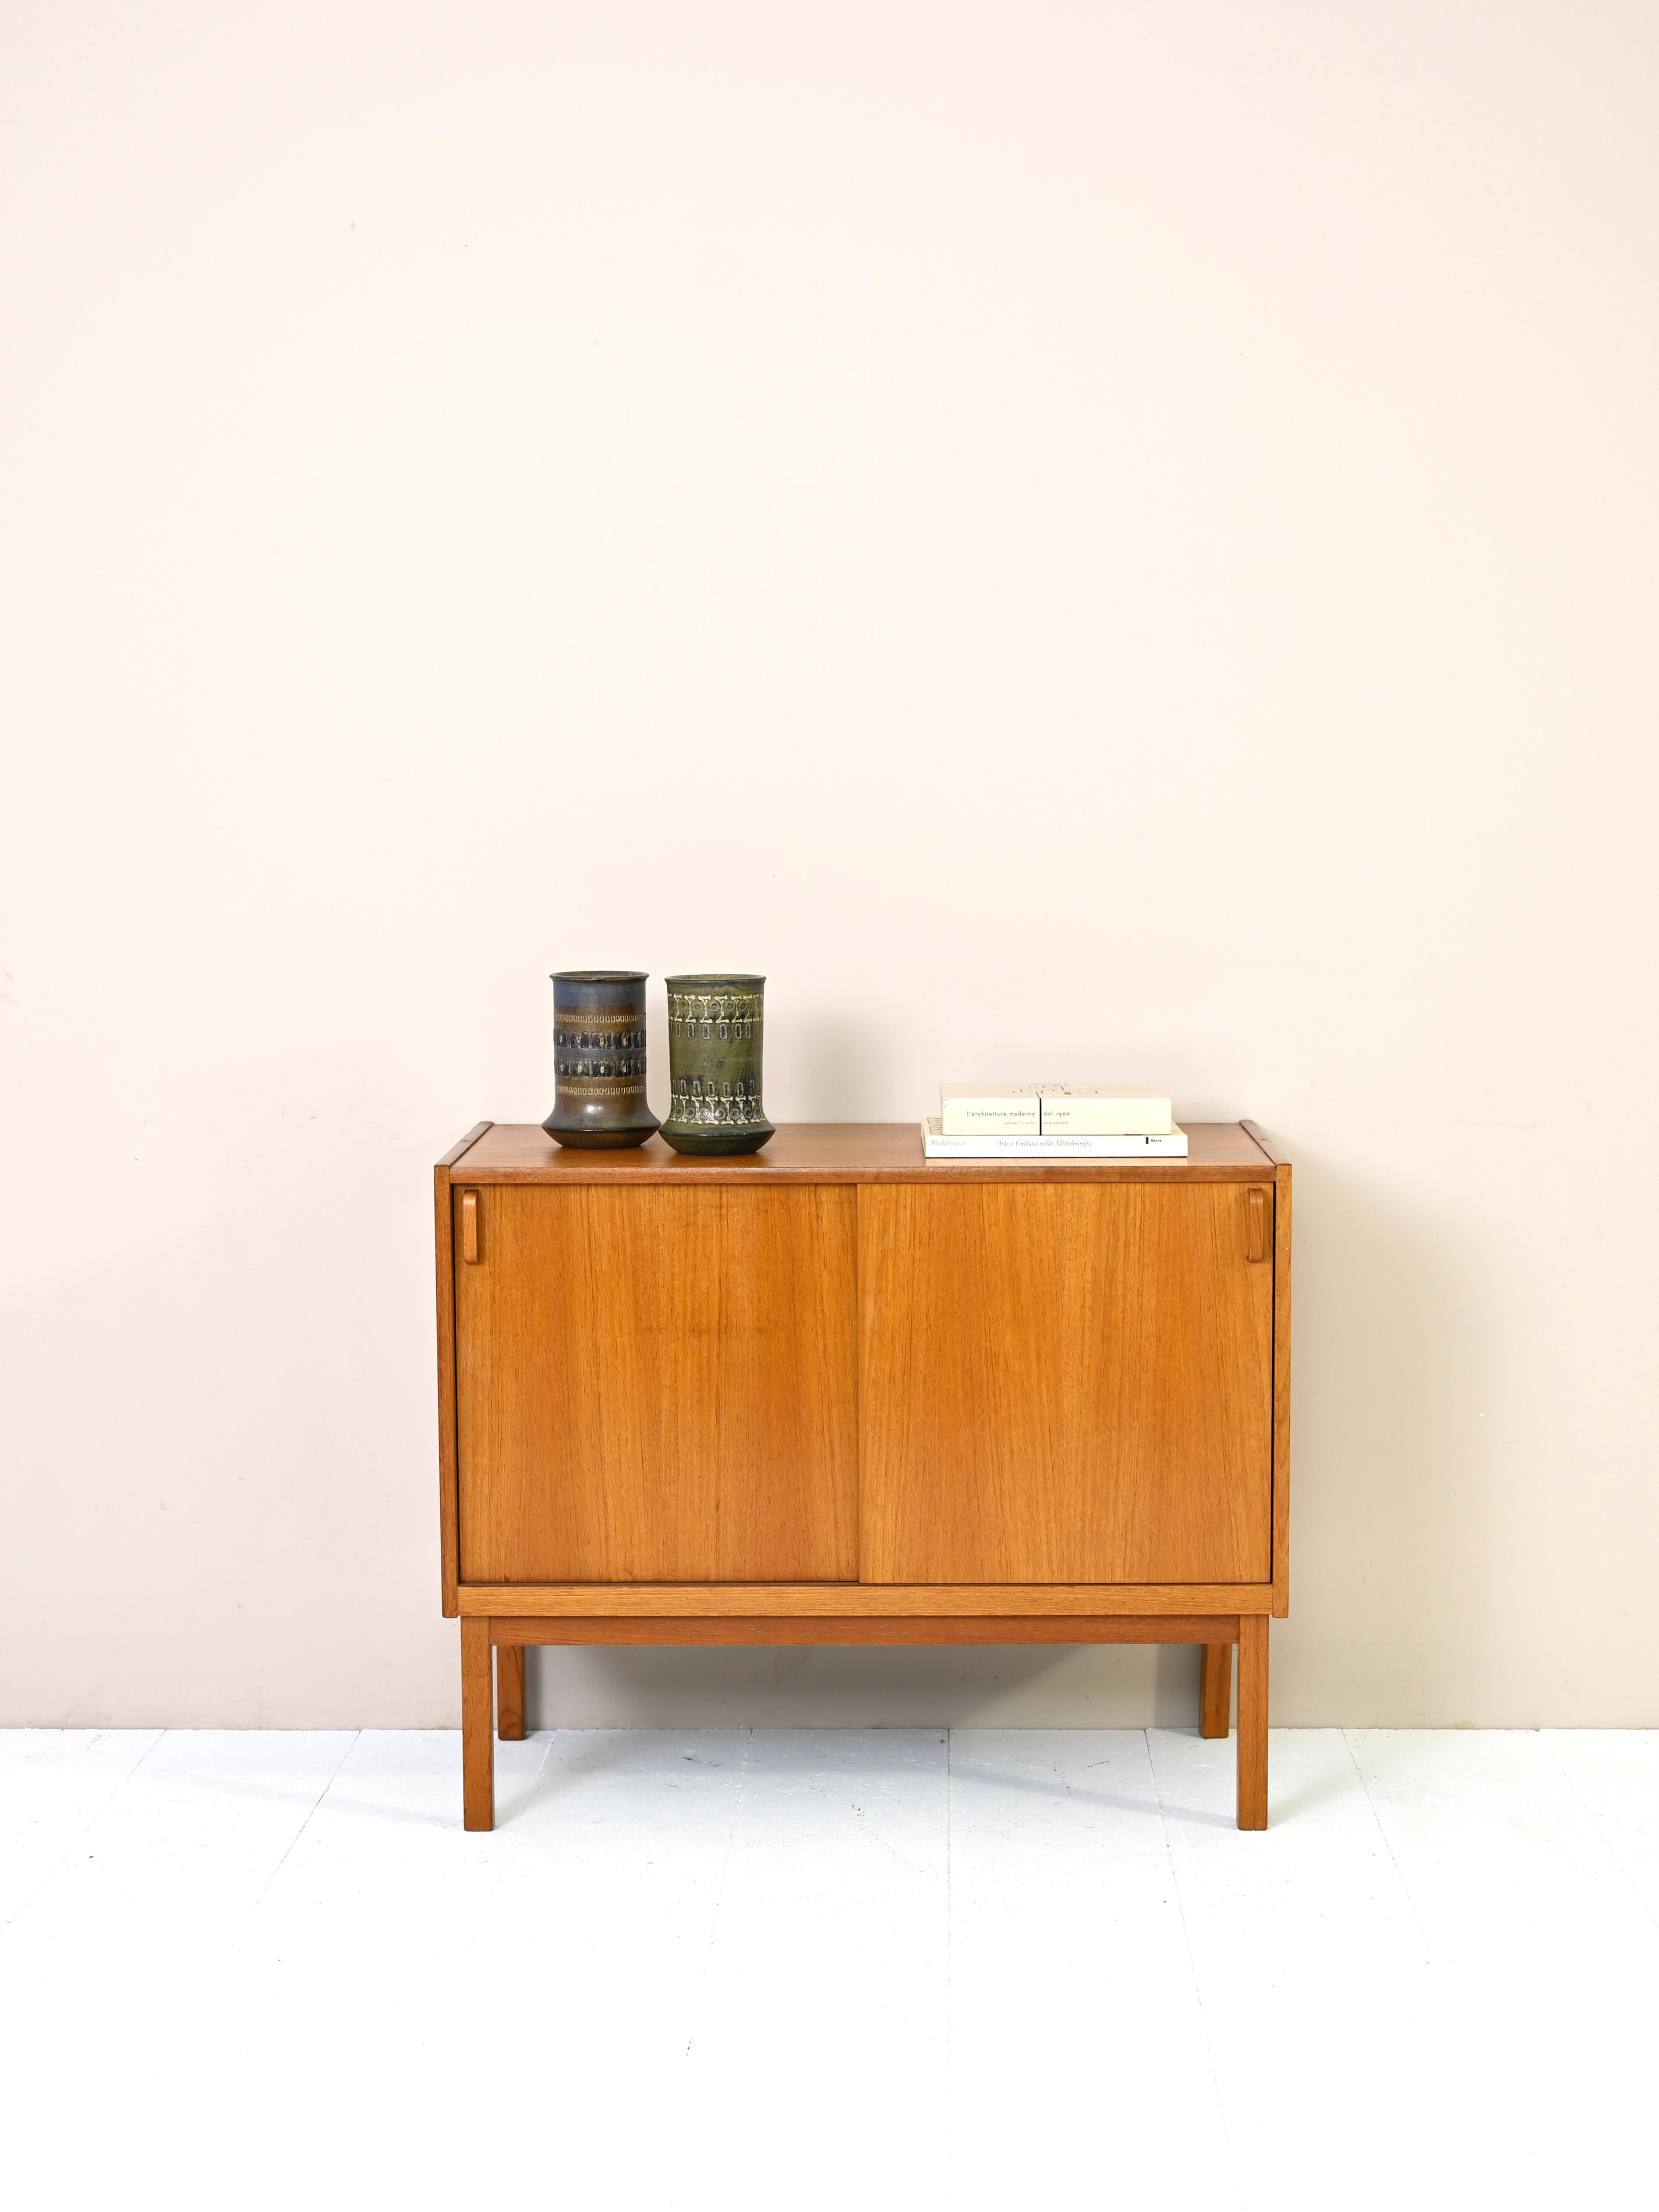 Sideboard designed by Fridhagen for Bodafors in the 1960s.
A piece with square, minimalist forms that recall the Nordic taste for simplicity.
It consists of a compartment equipped with an adjustable-height shelf and closed by sliding doors.
The